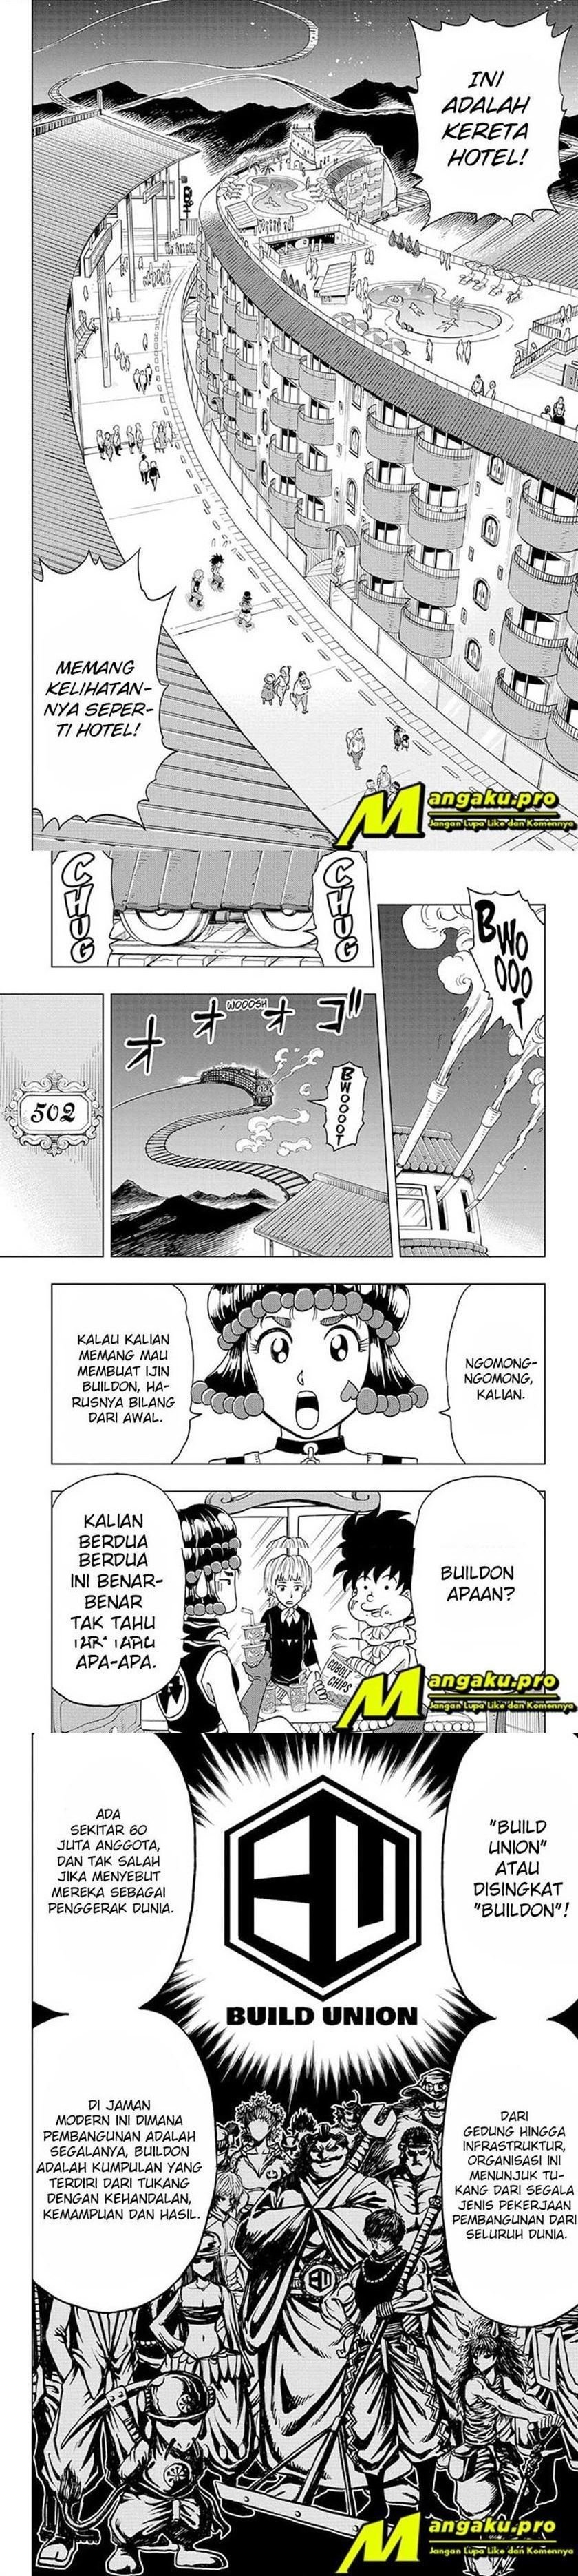 Build King Chapter 09